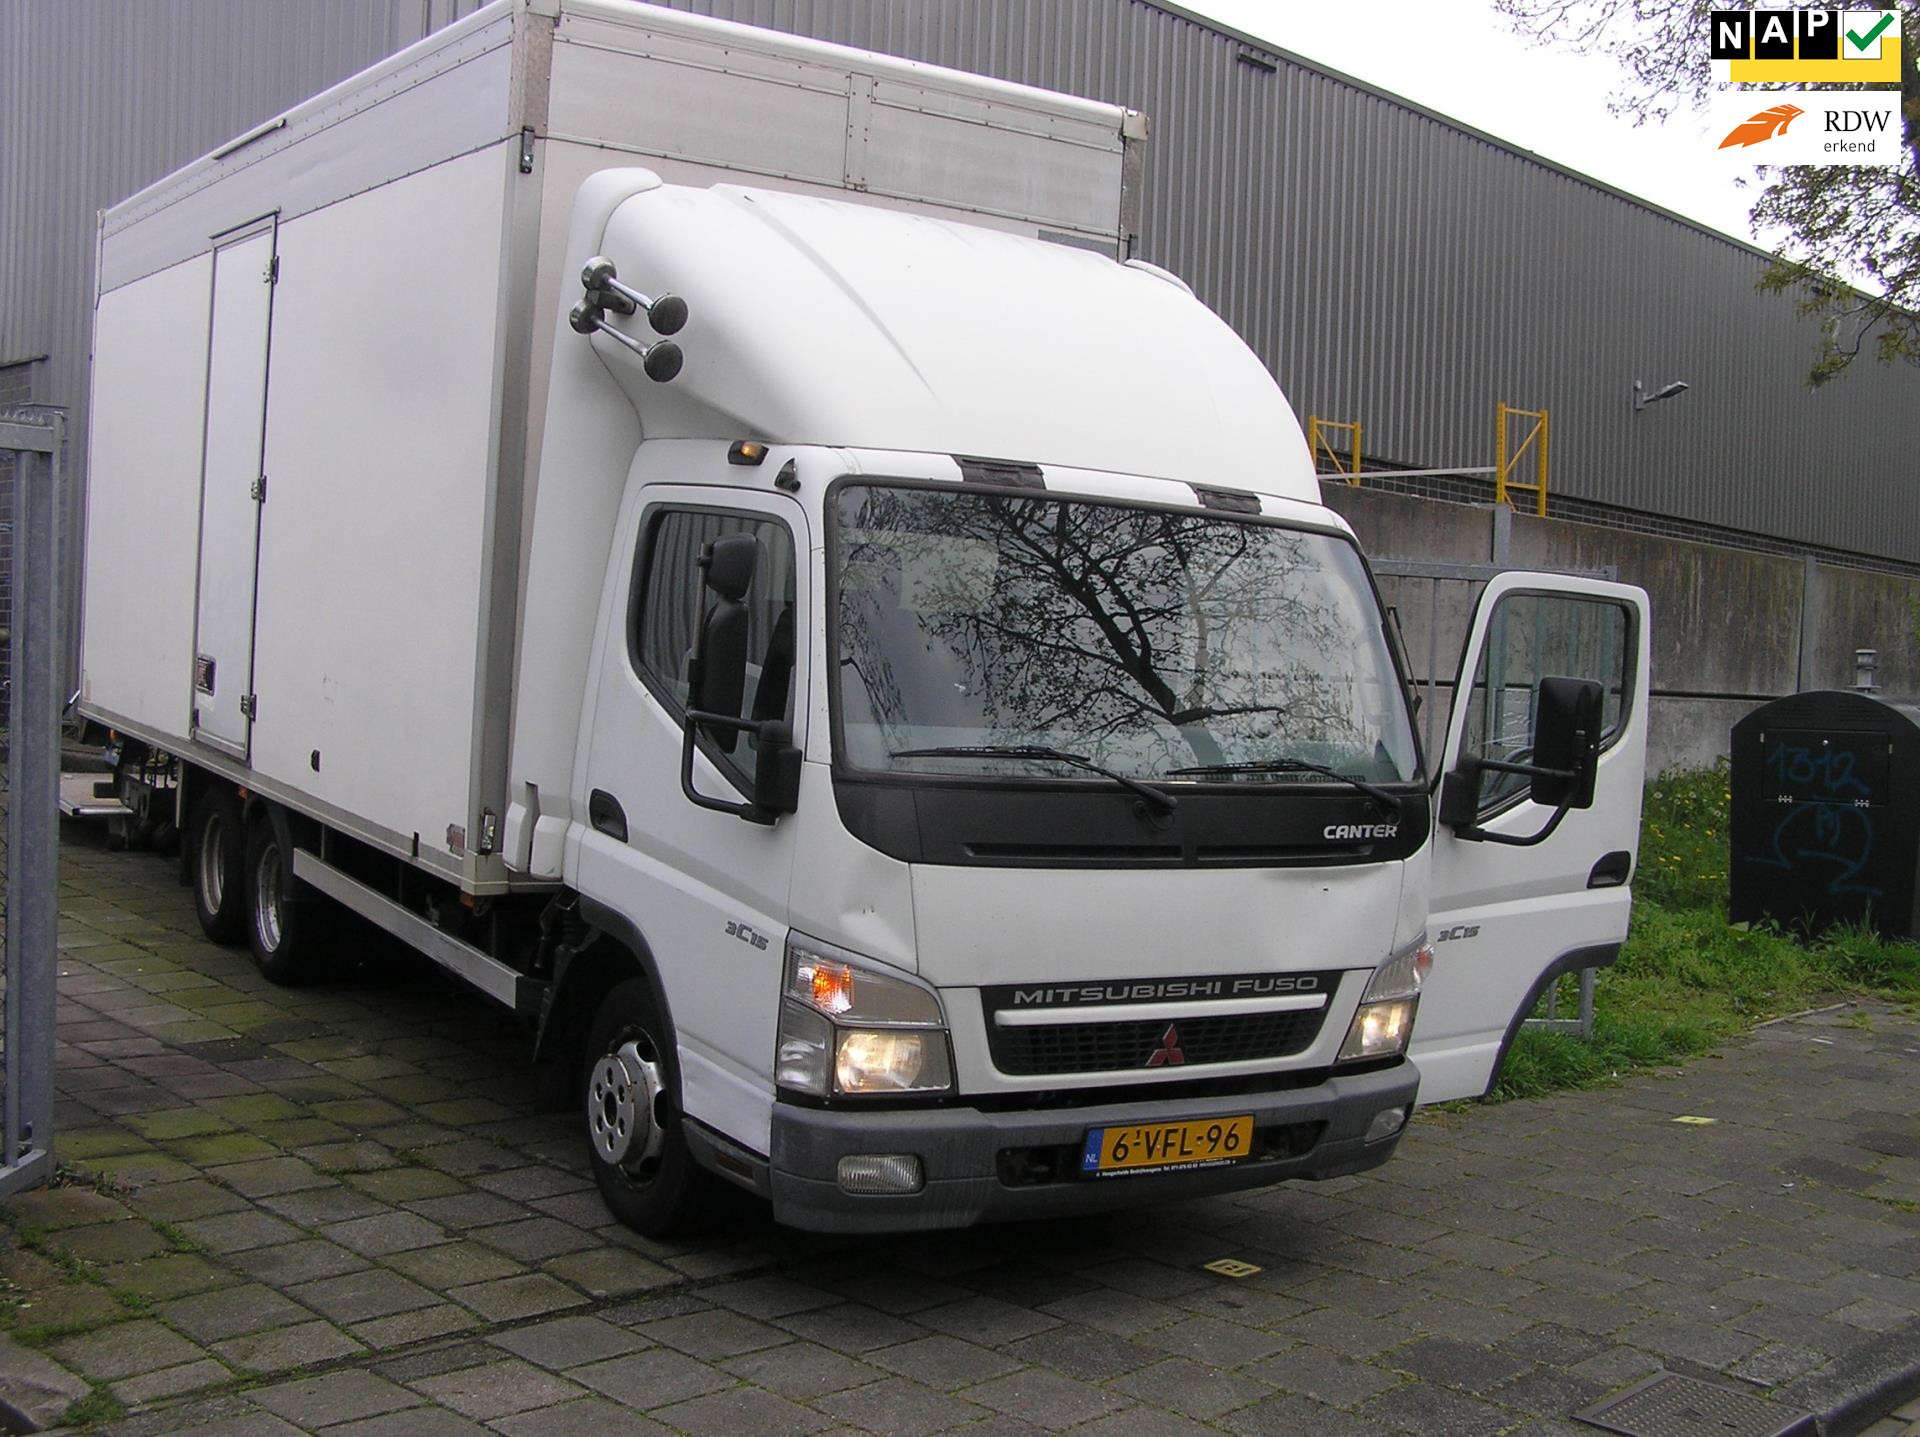 Mitsubishi Canter Transporter in White used in SASSENHEIM for € 1.-